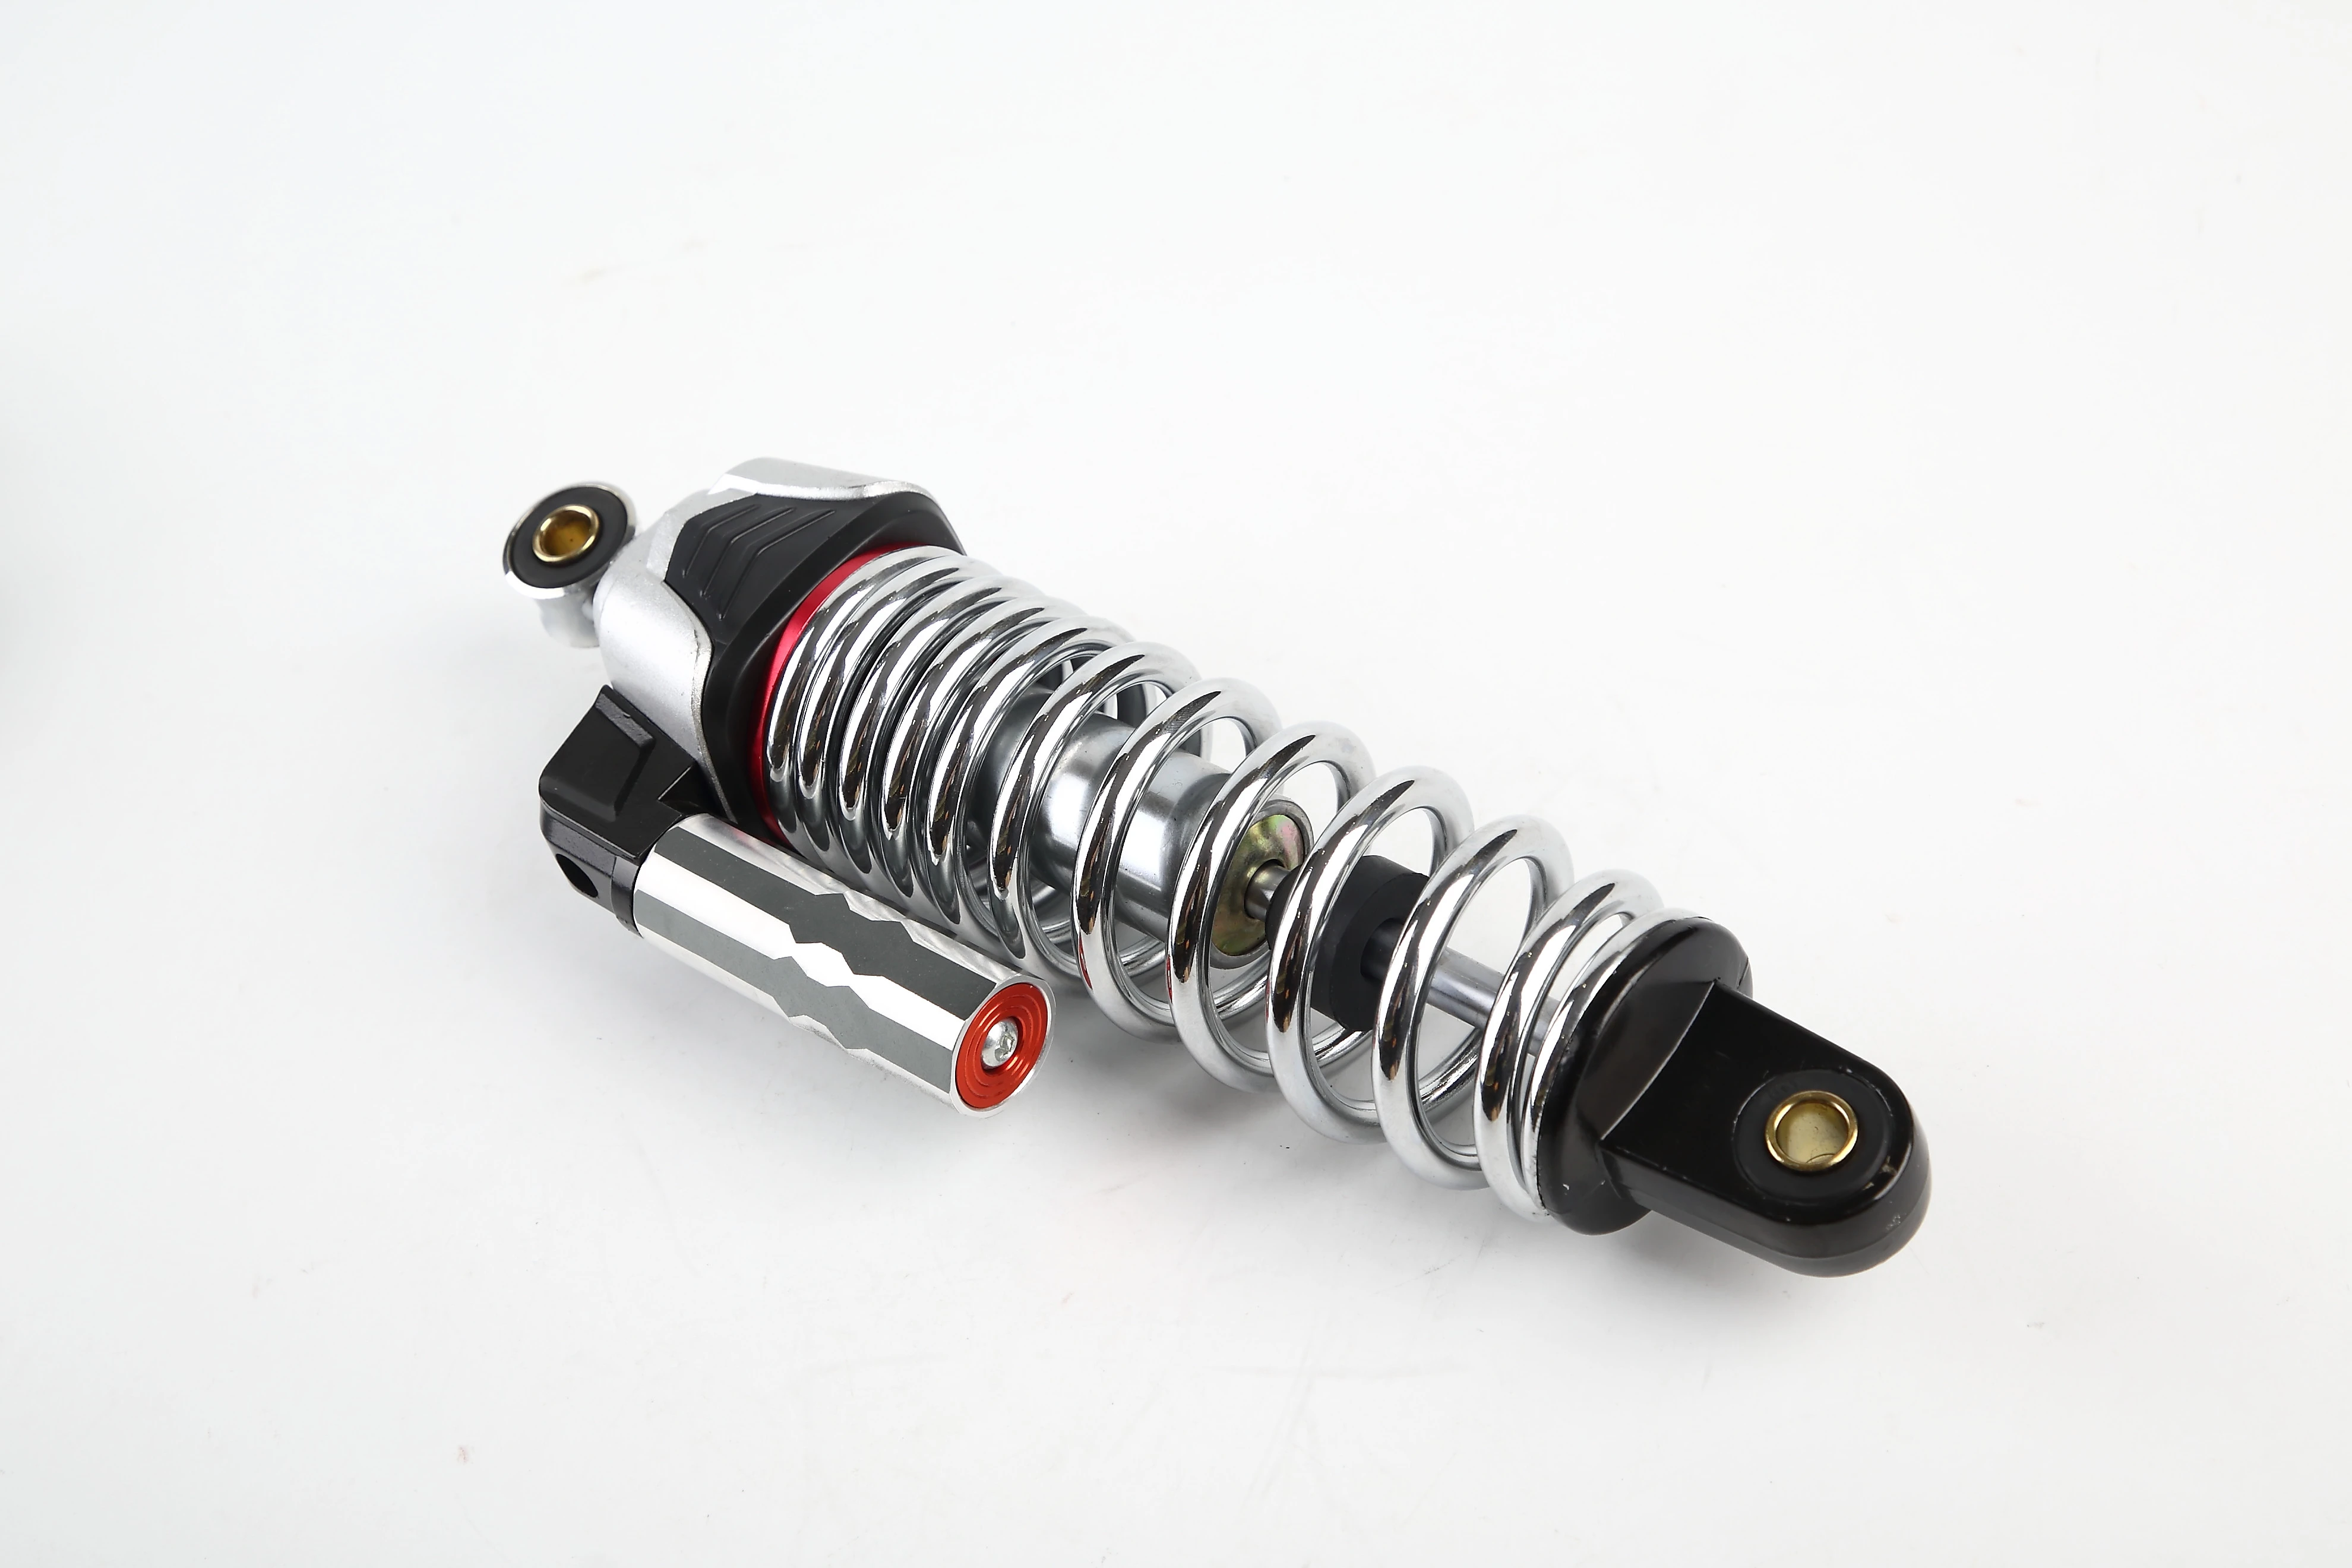 R093 290mmspare parts motorcycle shock  rear shock absorber for motorcycle with air bags